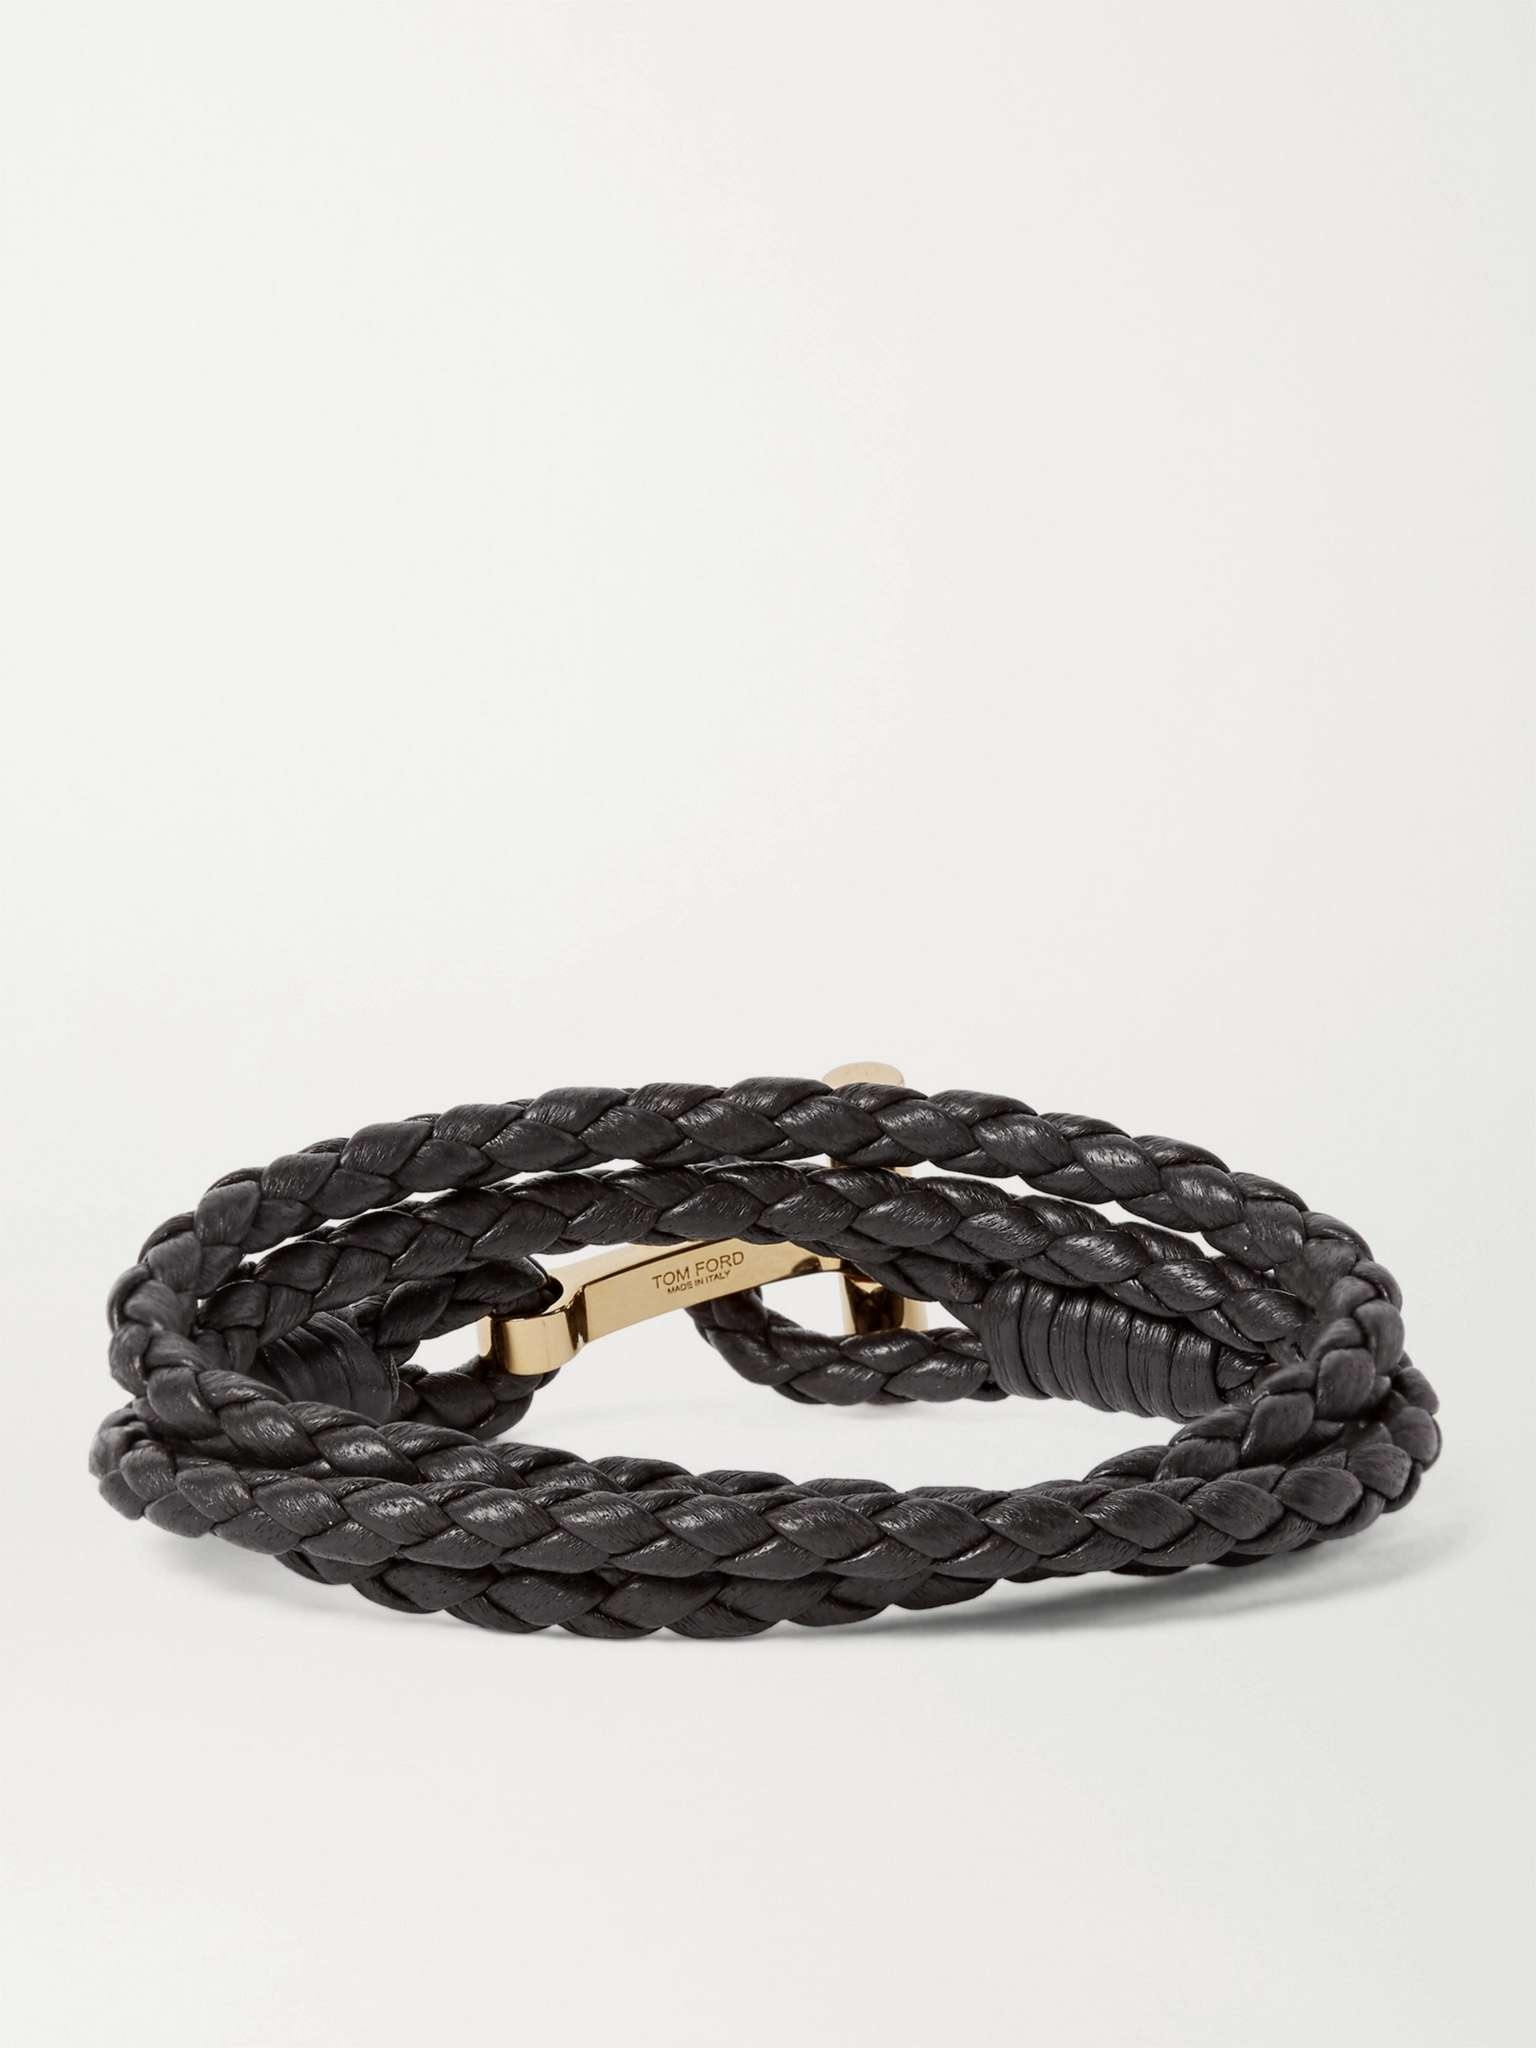 Woven Leather and Gold-Plated Wrap Bracelet - 3